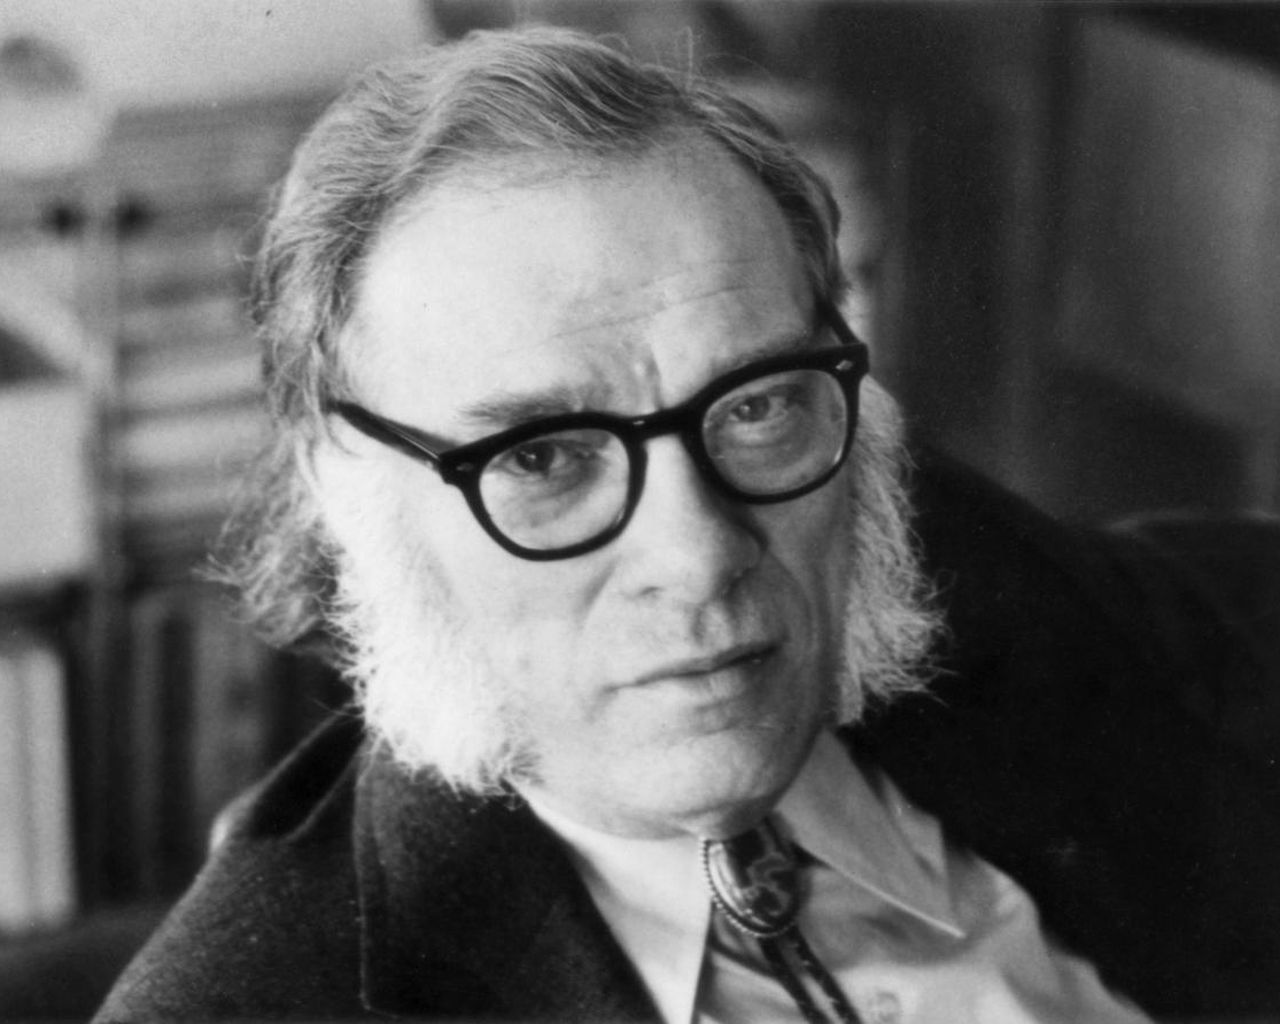 years ago, Isaac Asimov was asked by the Star to predict the world of 2019. Here is what he wrote